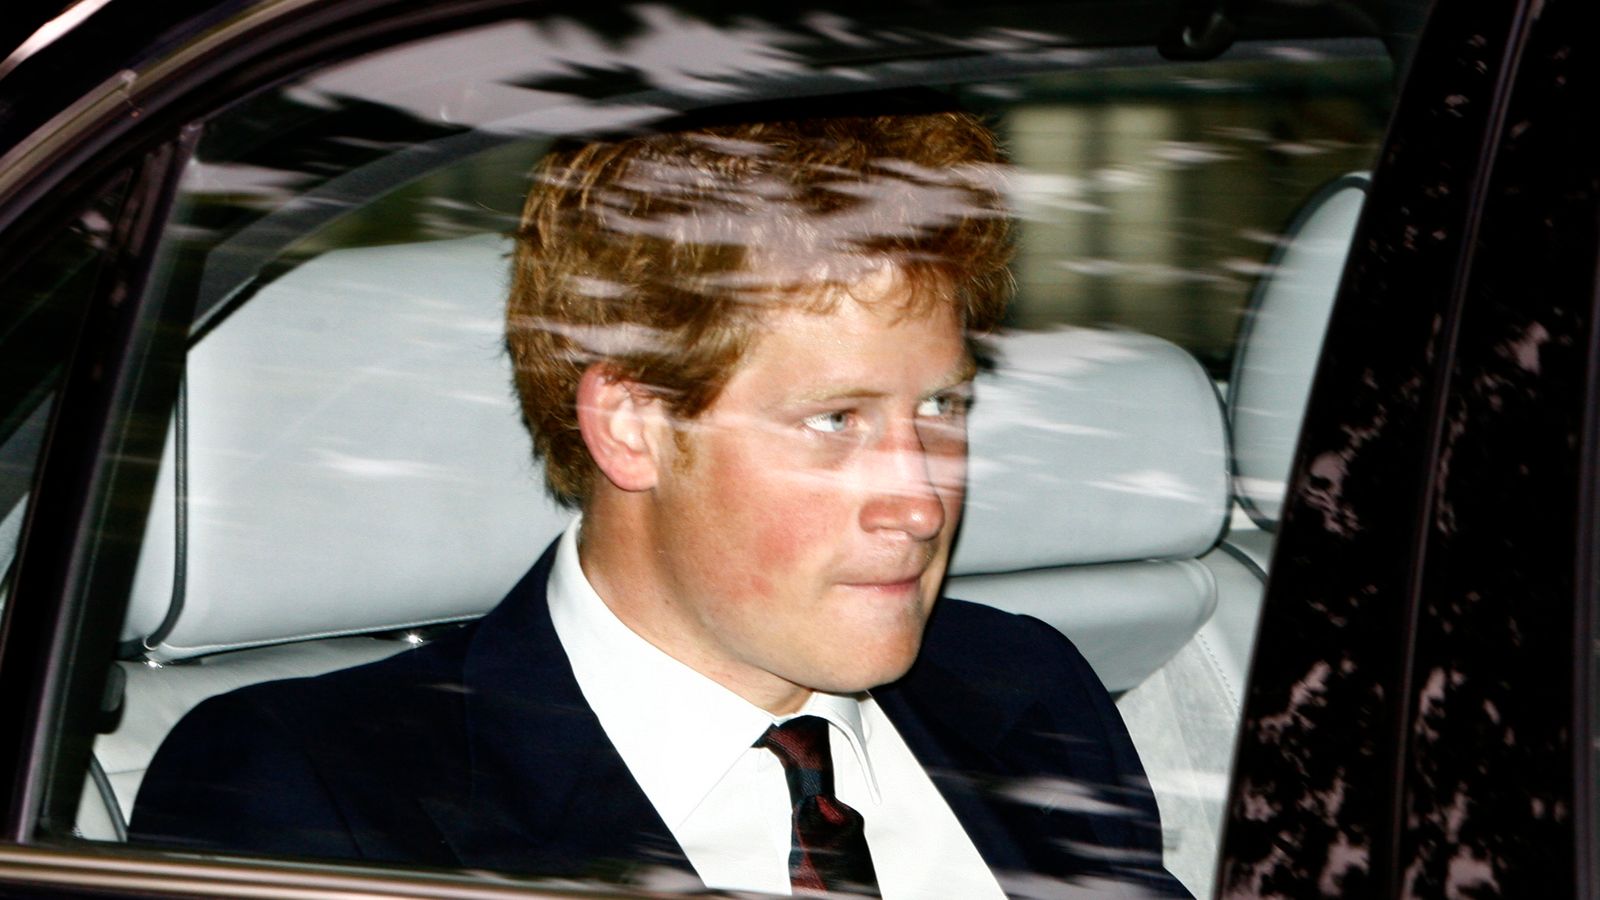 Prince Harry describes moment he visited site of Princess Diana's fatal crash at 105kph